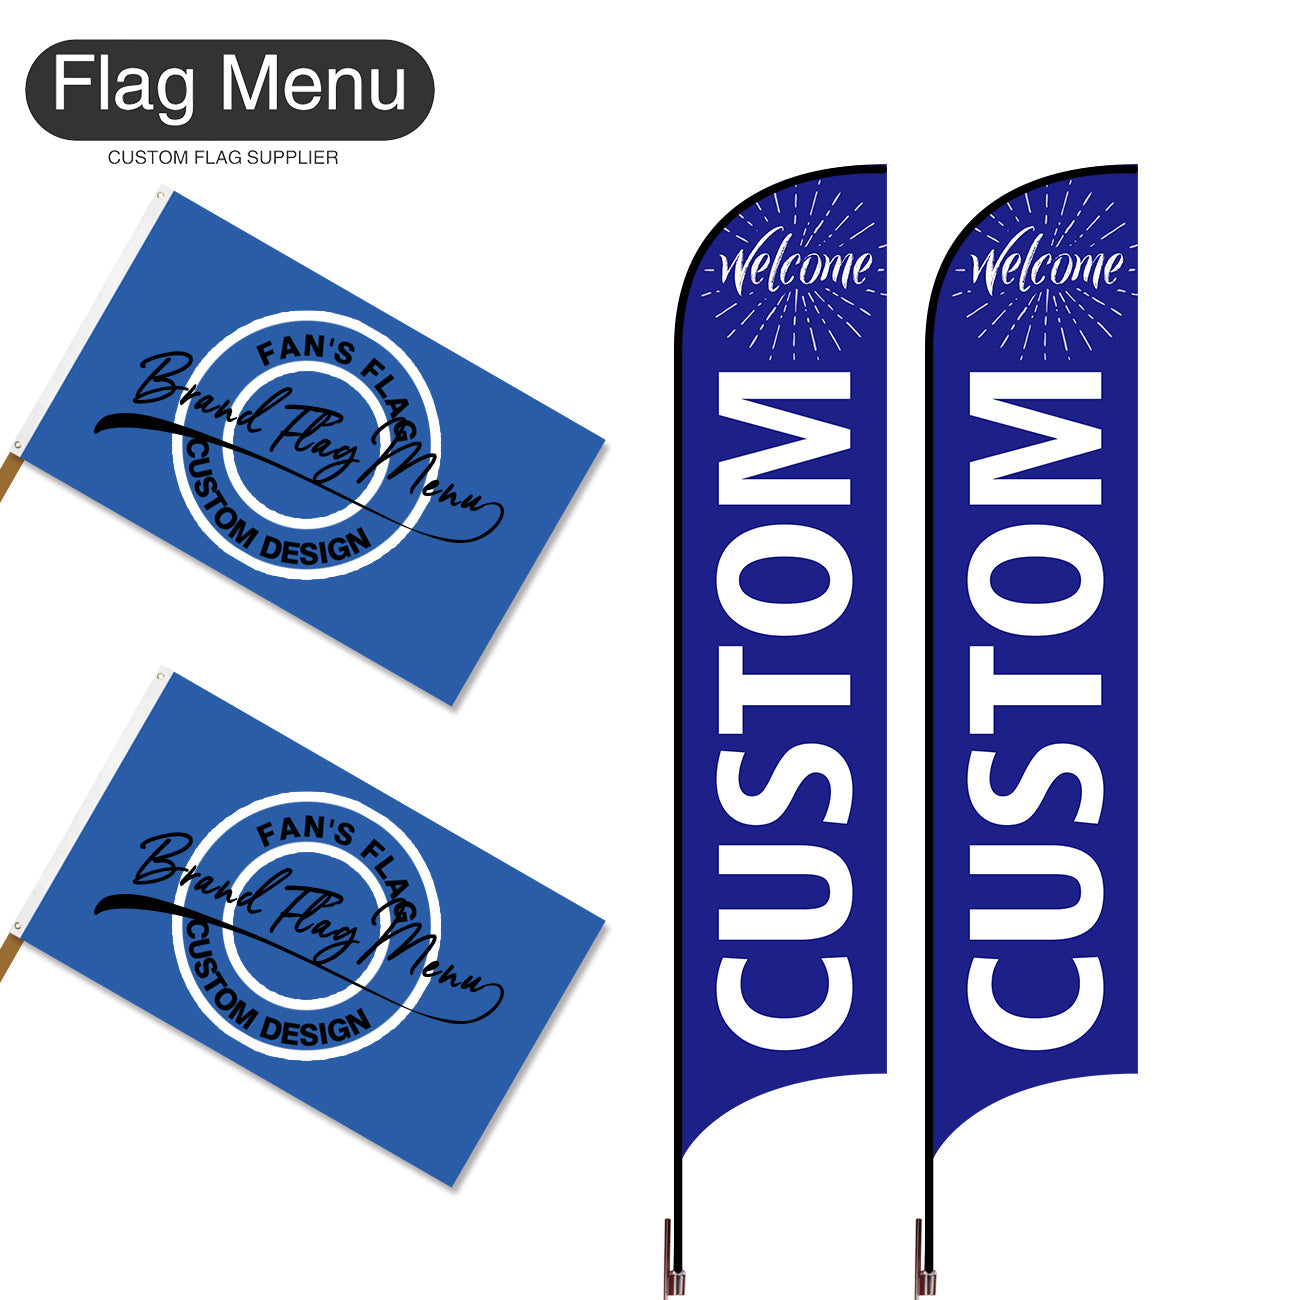 Outdoor Advertising Set - C-Blue C-S - Feather Flag -Double Sided & 3'x5' Regular Flag -Single Sided-Cross & Water Bag-Flag Menu